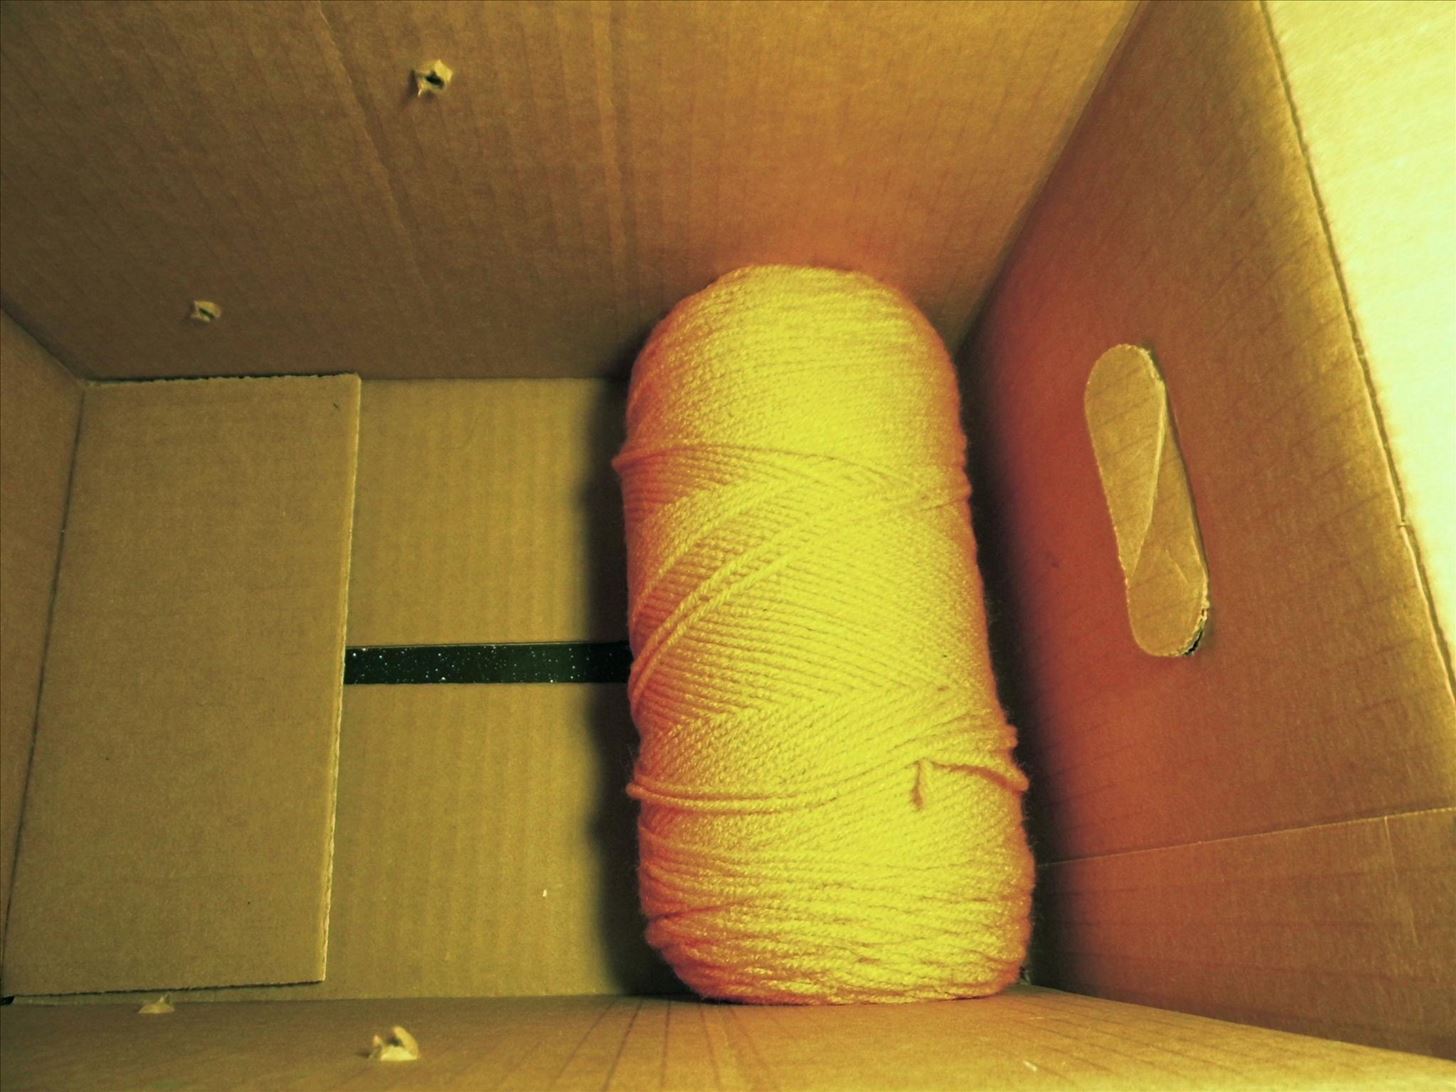 How to Make a Yarn Dispensing Display Out of a Cardboard Box and Dowels